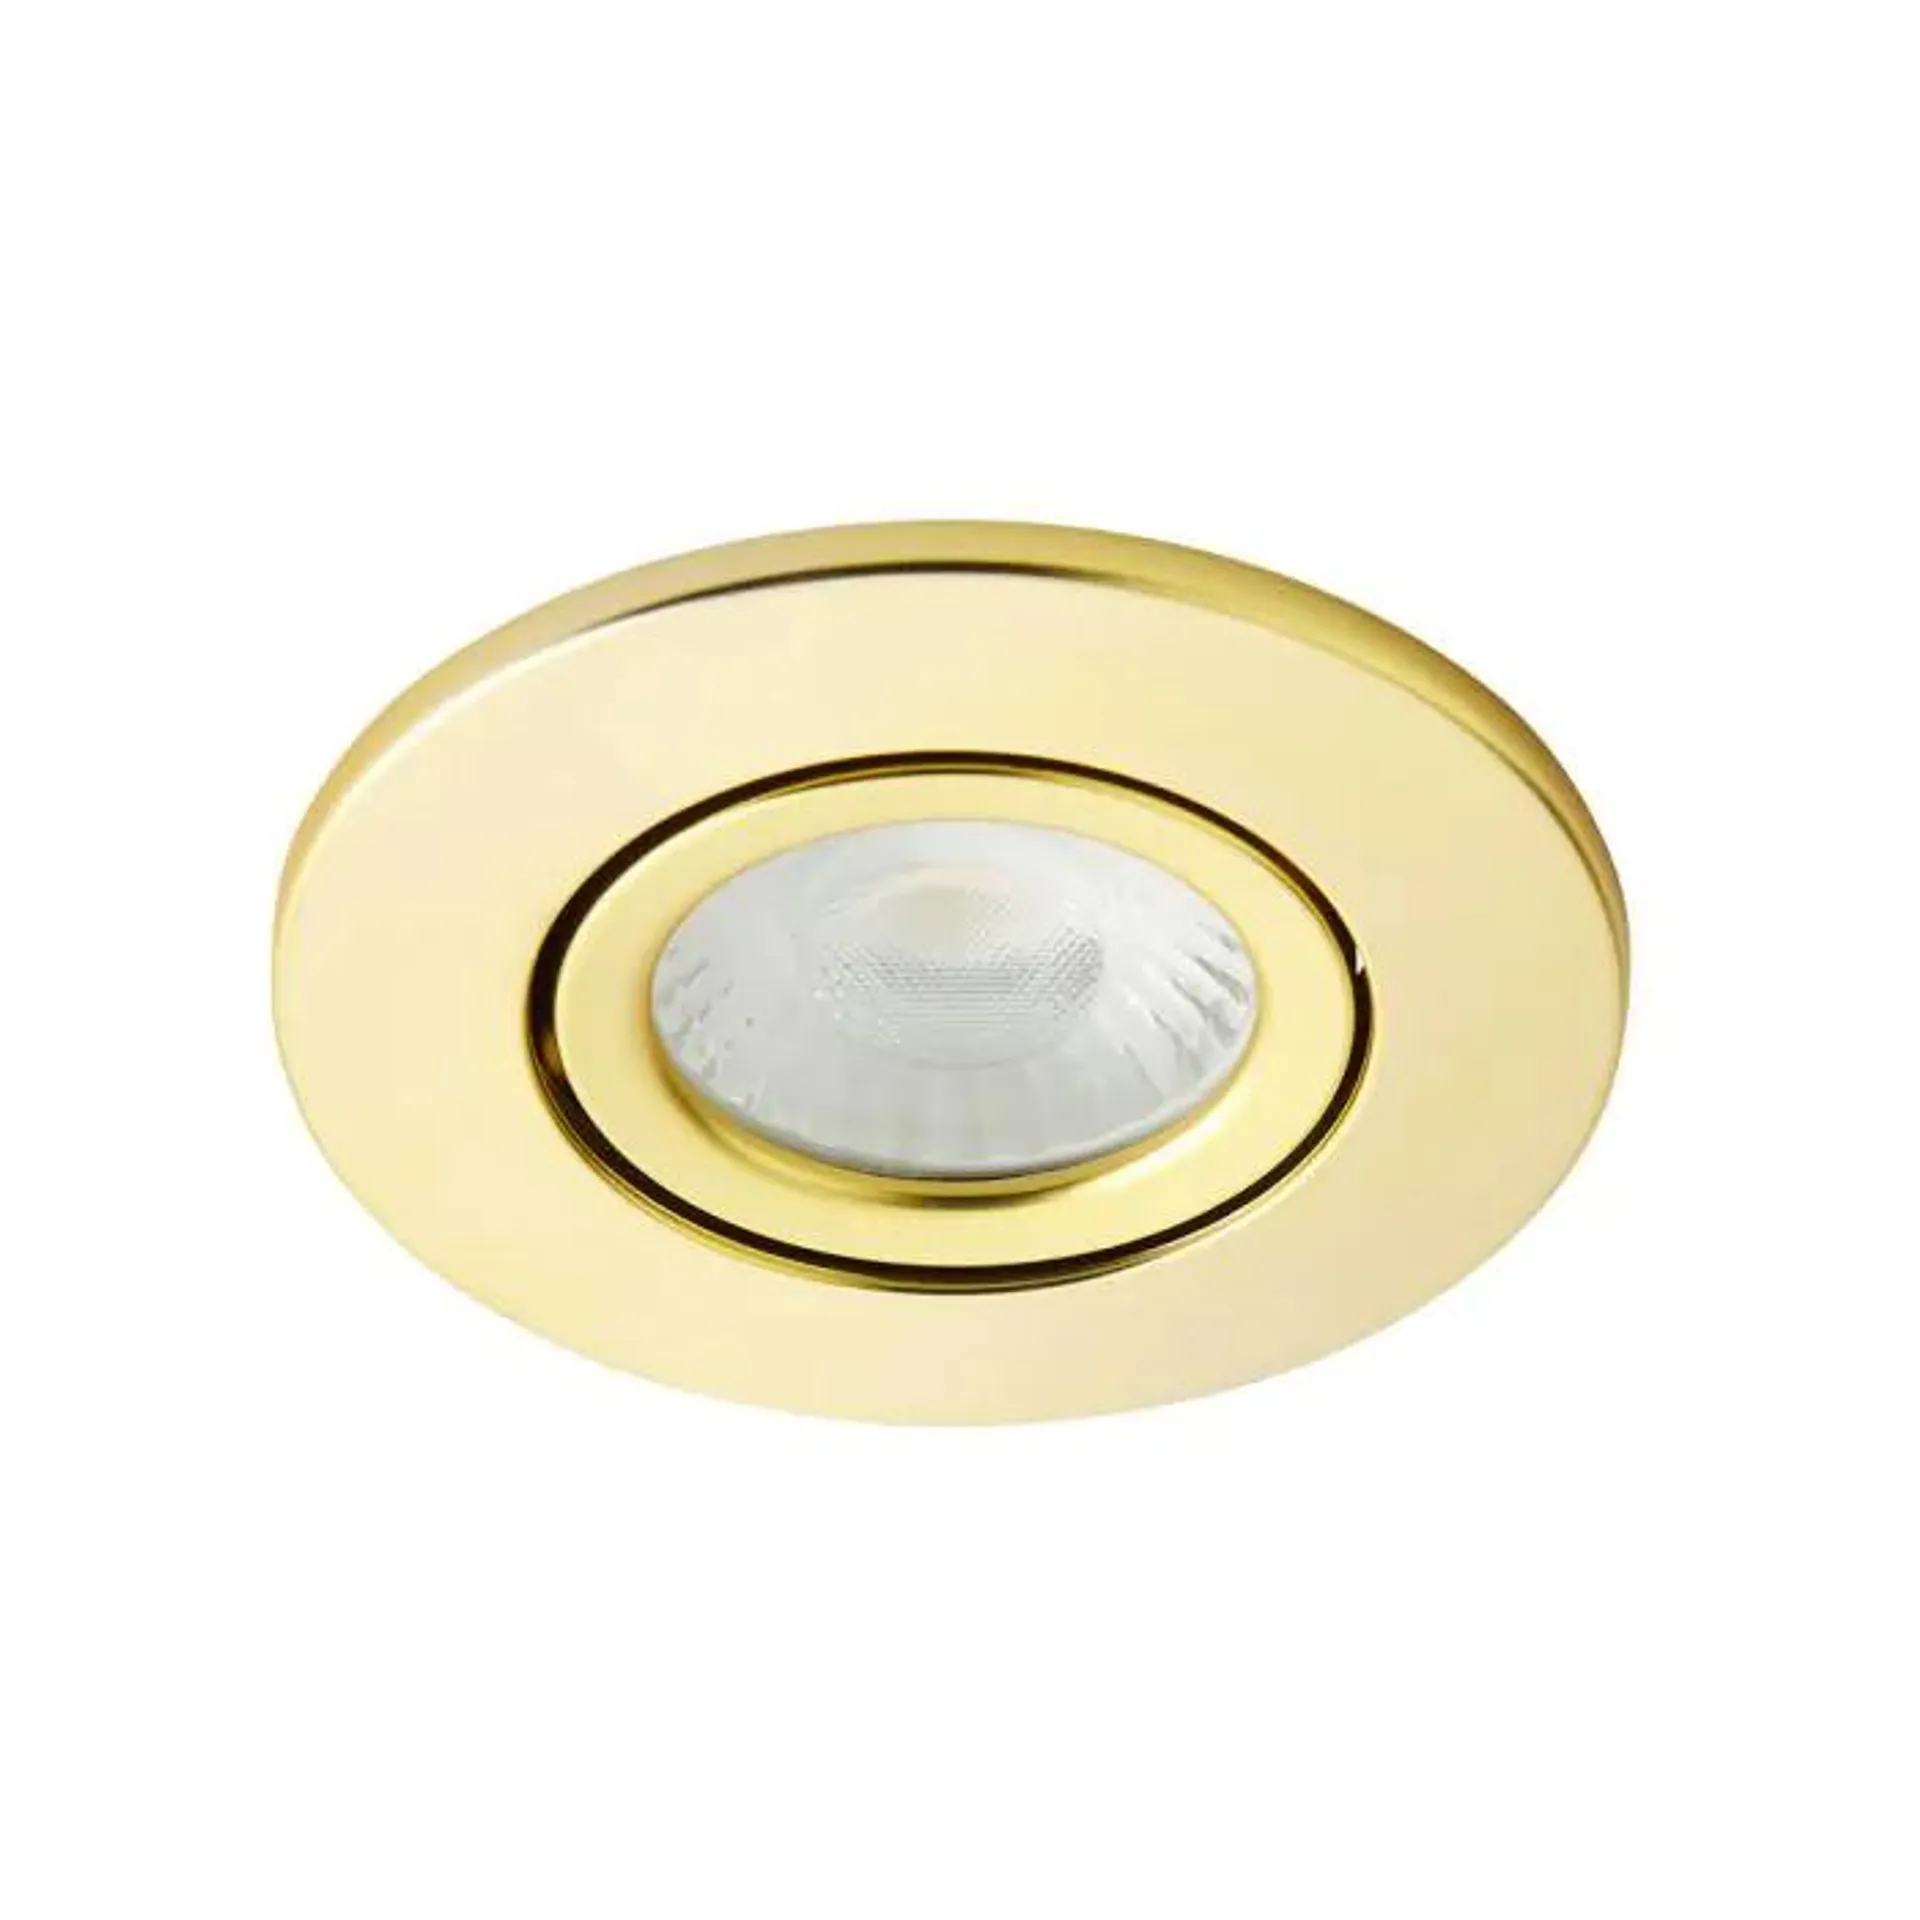 Cal Fire Rated LED IP65 Downlight, Satin Brass